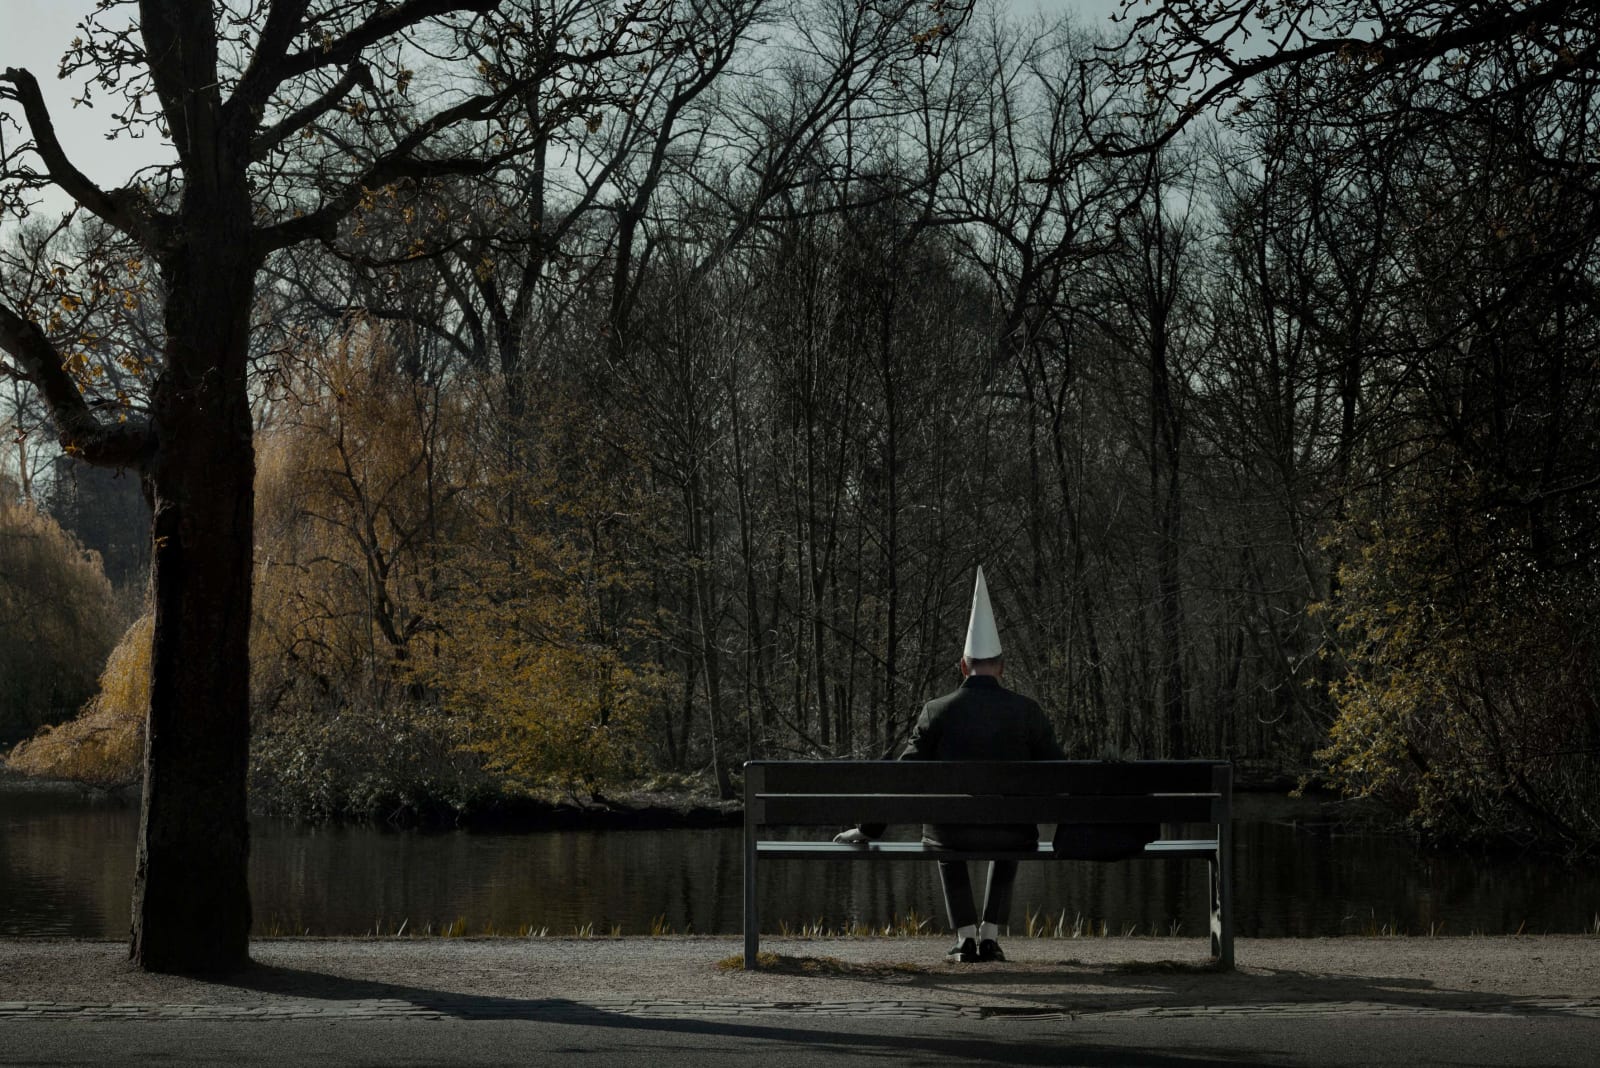 Erwin Olaf in dunce cape sitting on park bench facing water and autumnal foliage, by Erwin Olaf